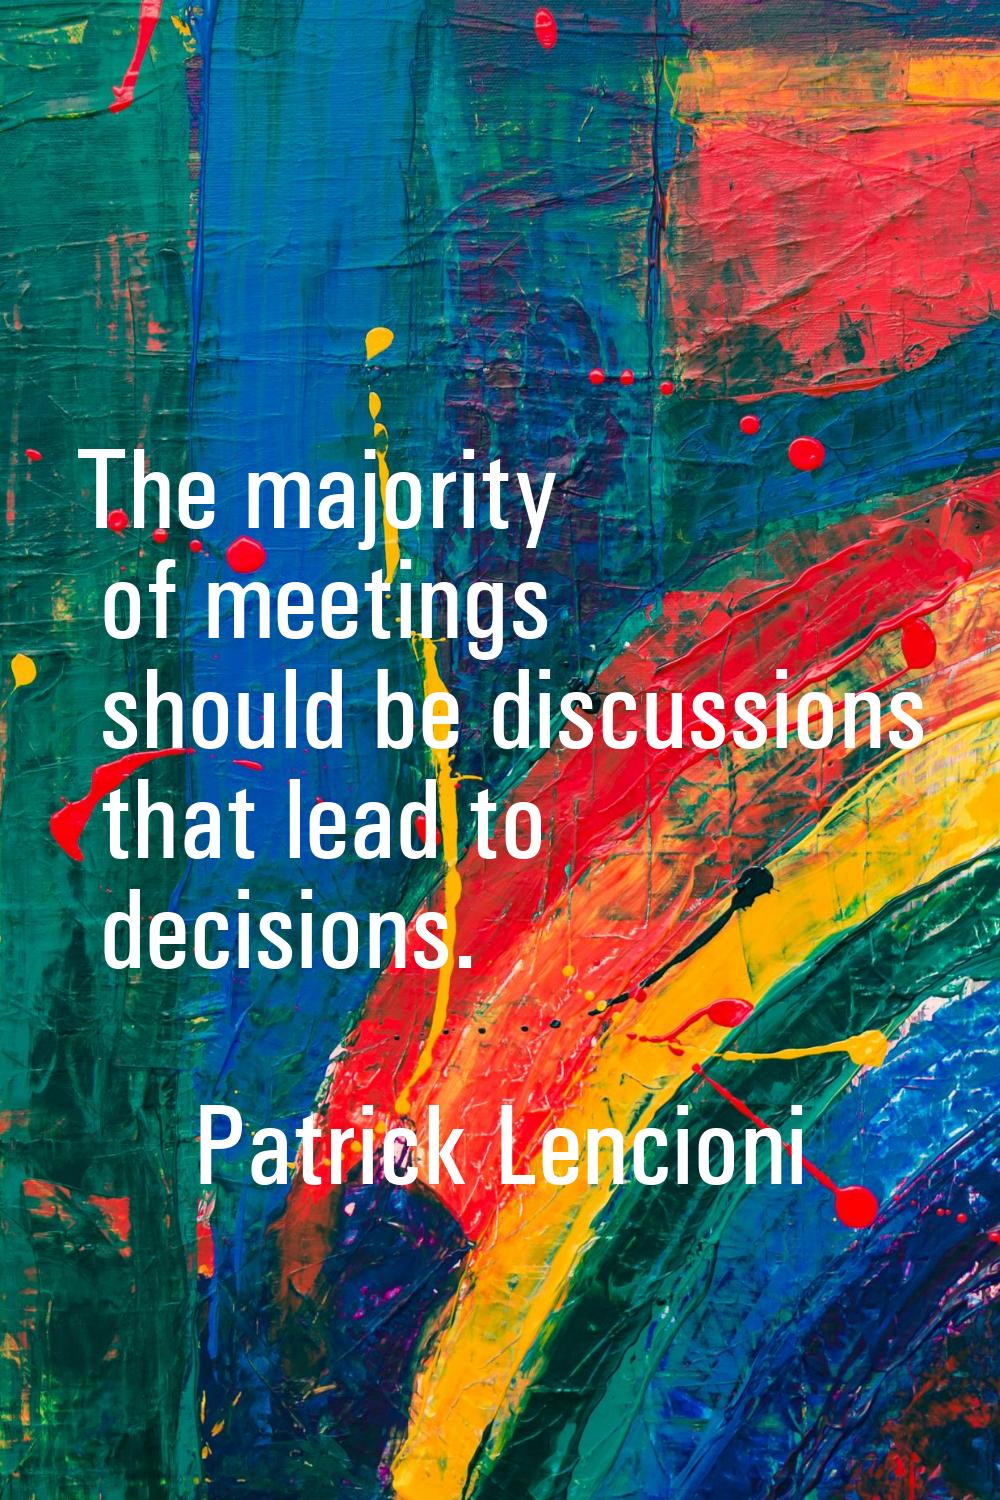 The majority of meetings should be discussions that lead to decisions.